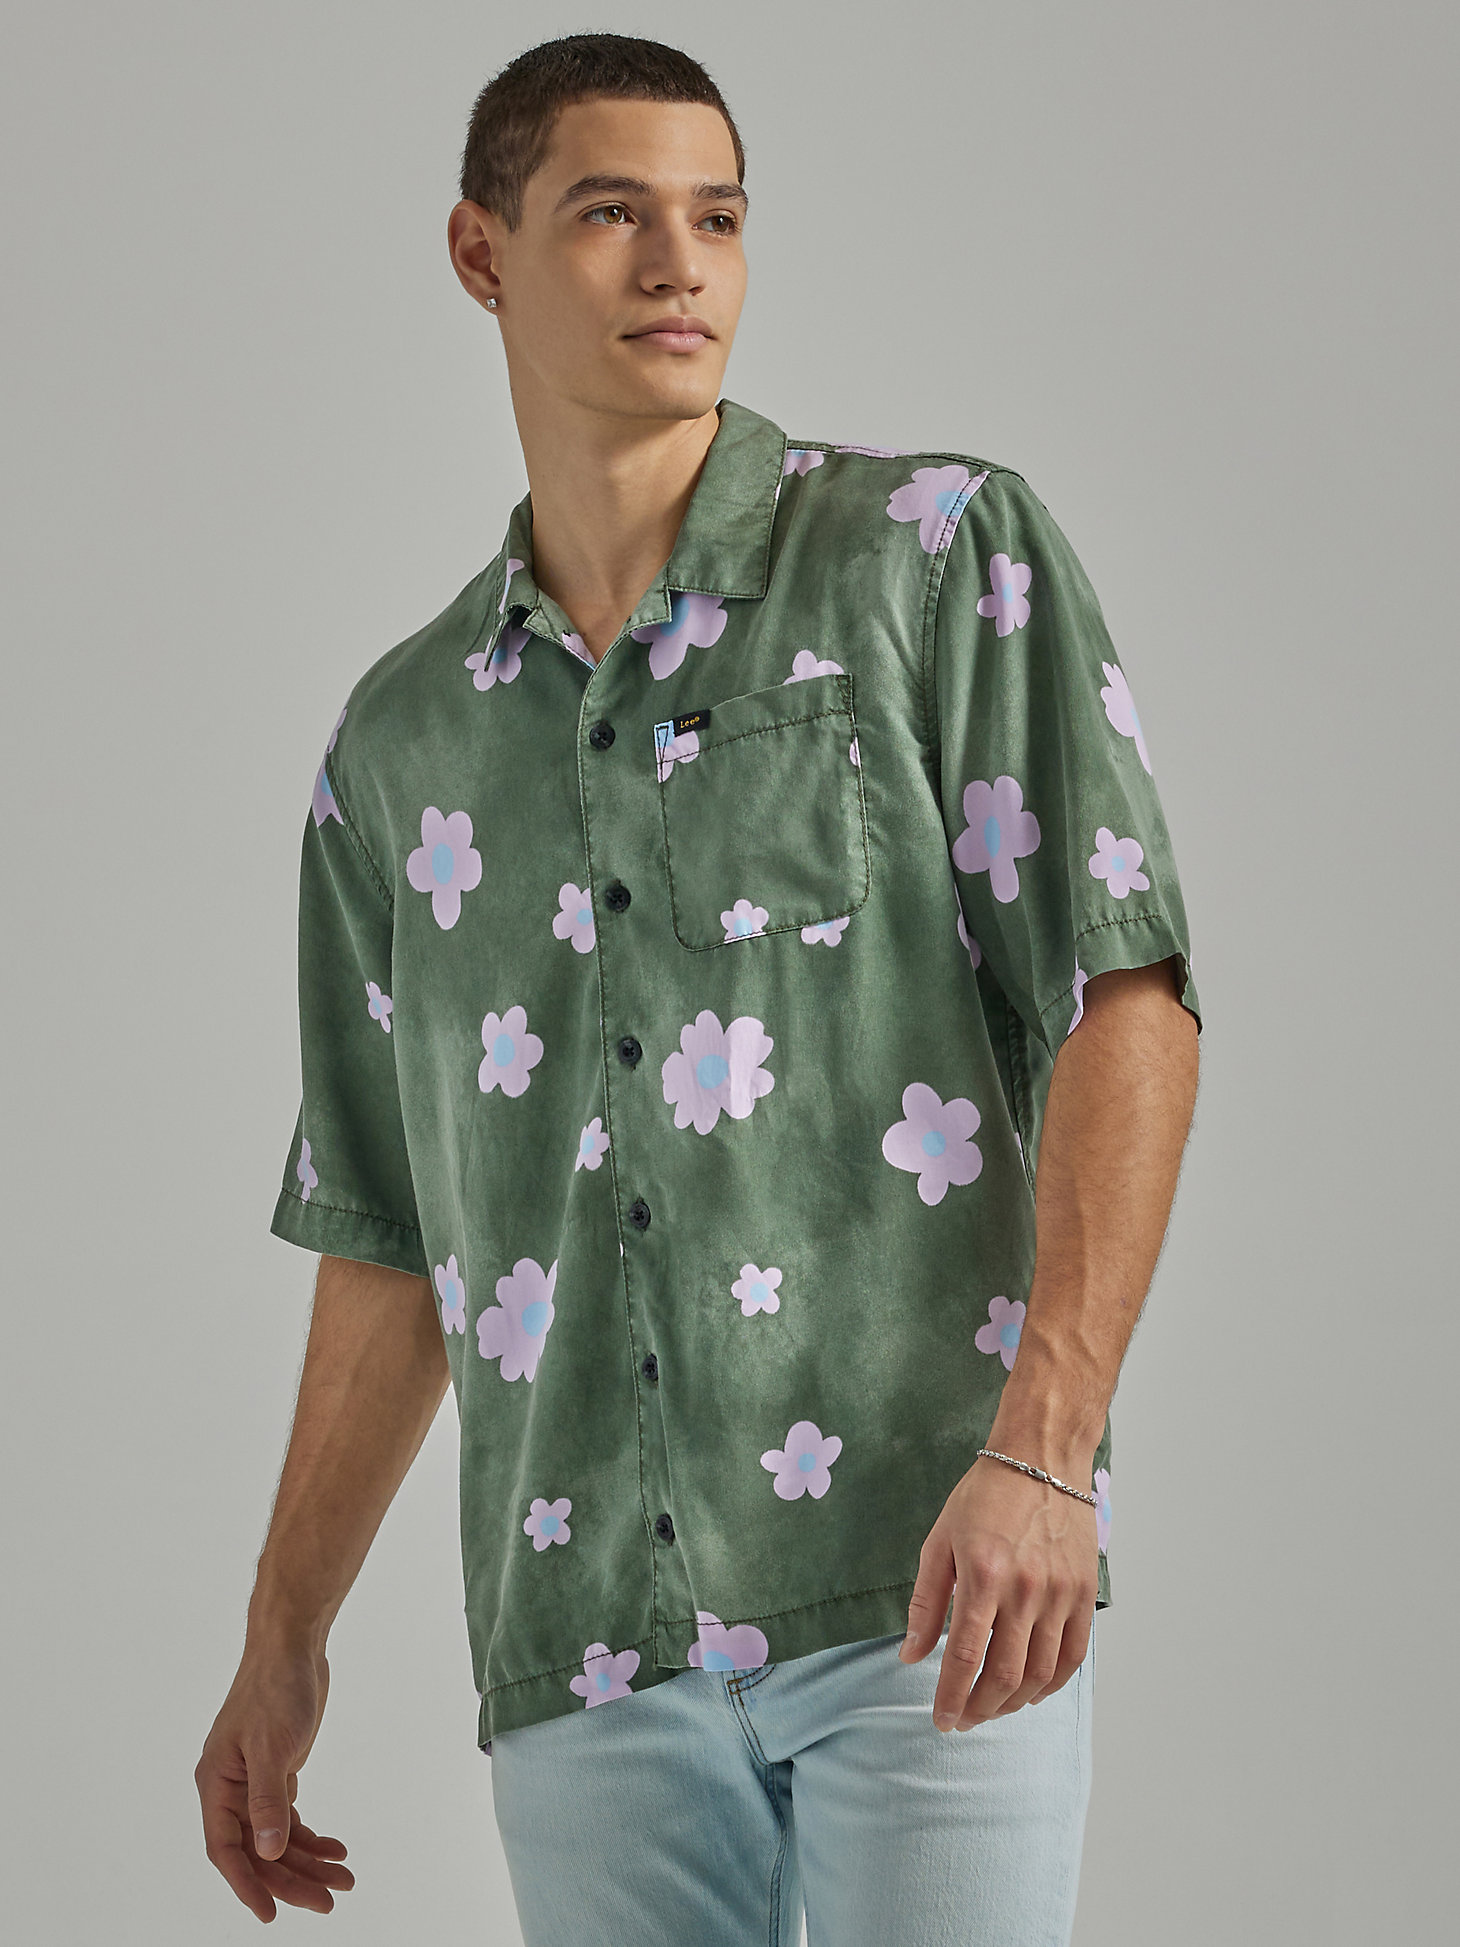 Men's Oversized Floral Shirt in Fort Green Floral alternative view 2